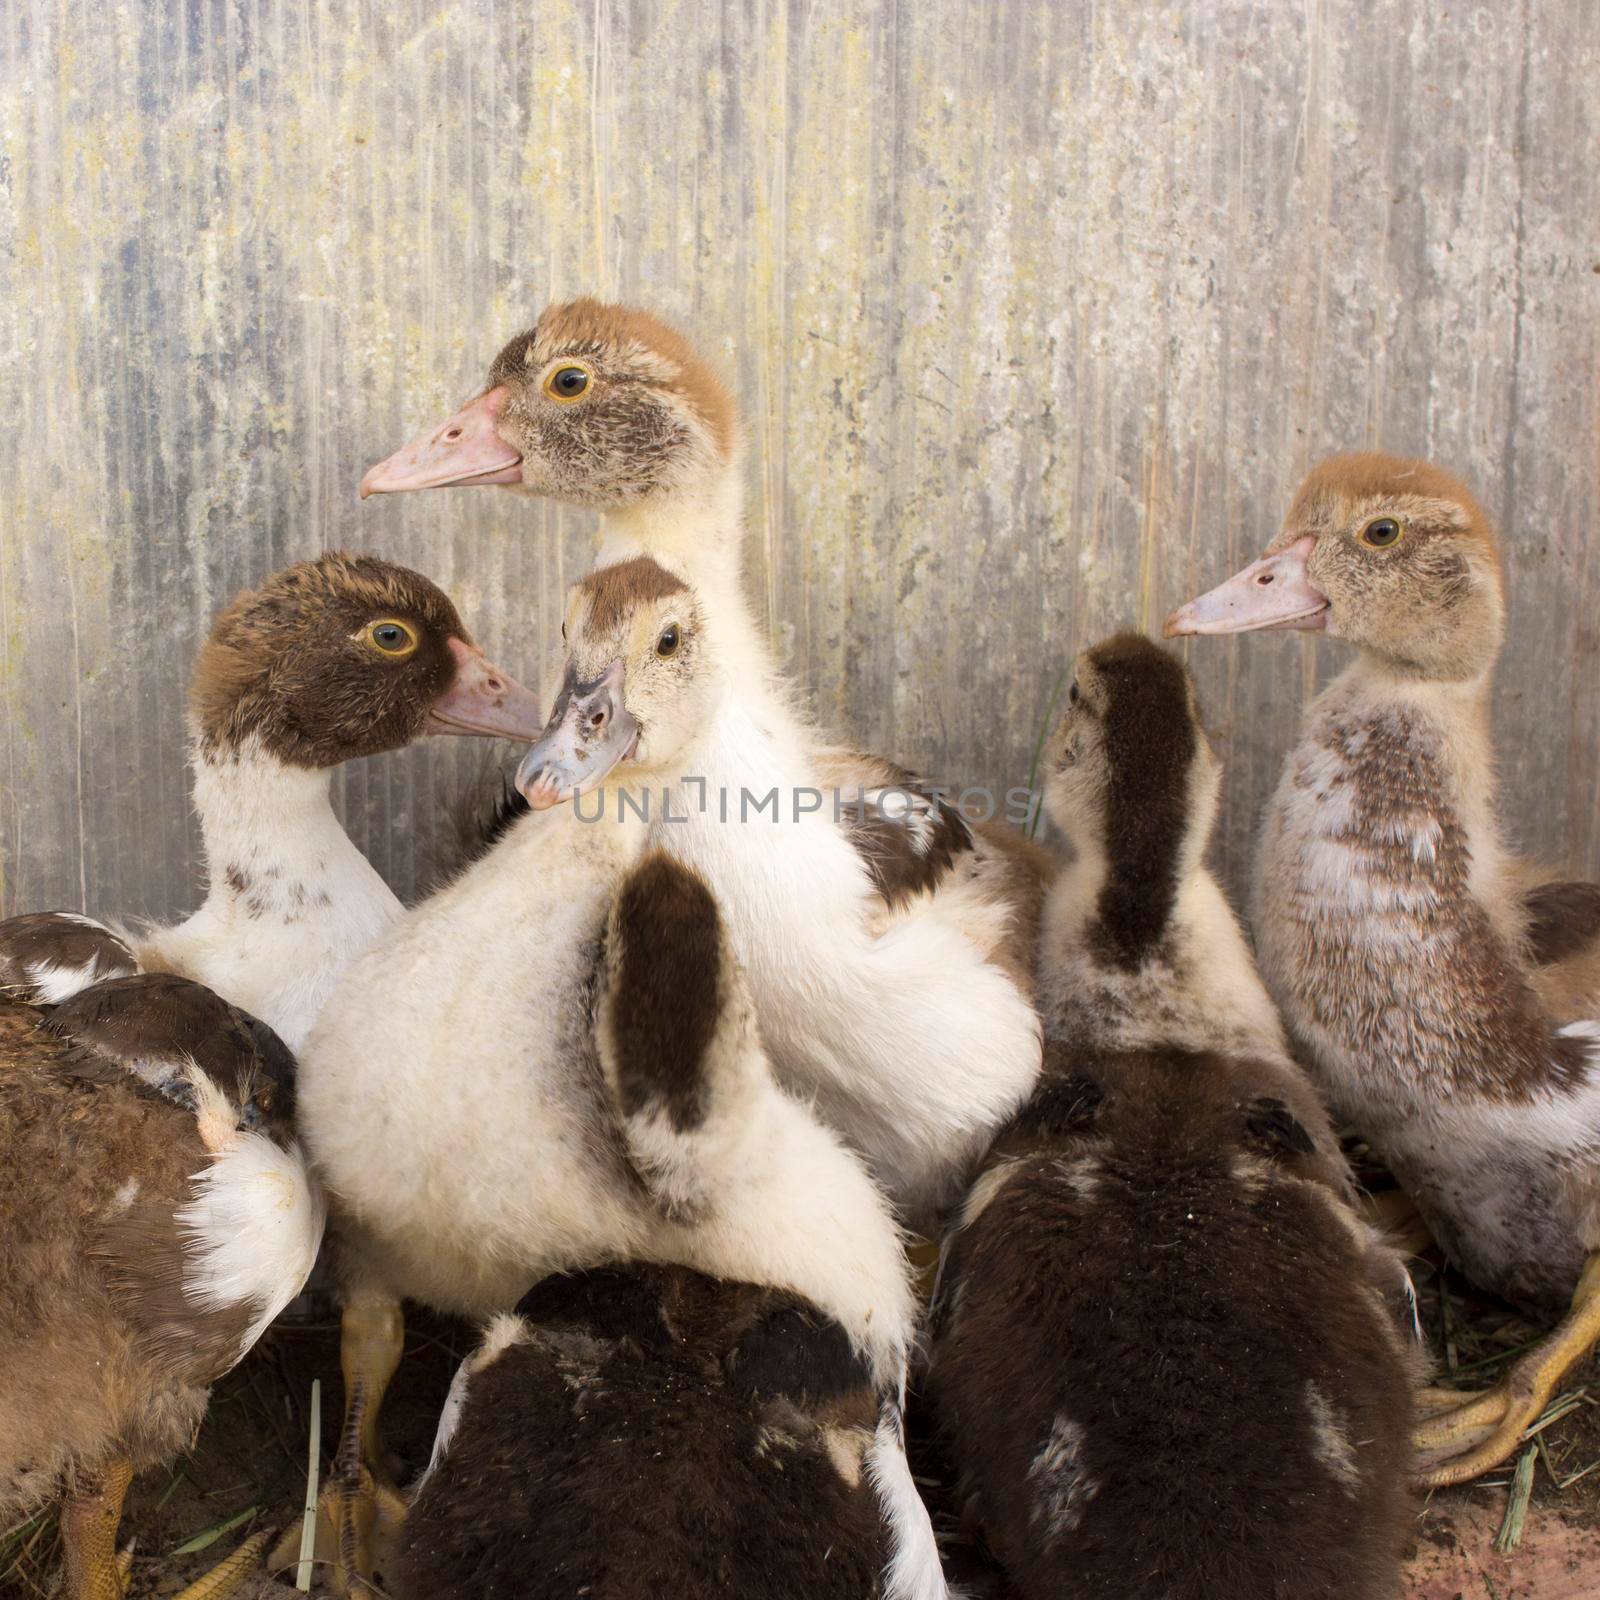 Ducklings in a home farm. Close up of duckling